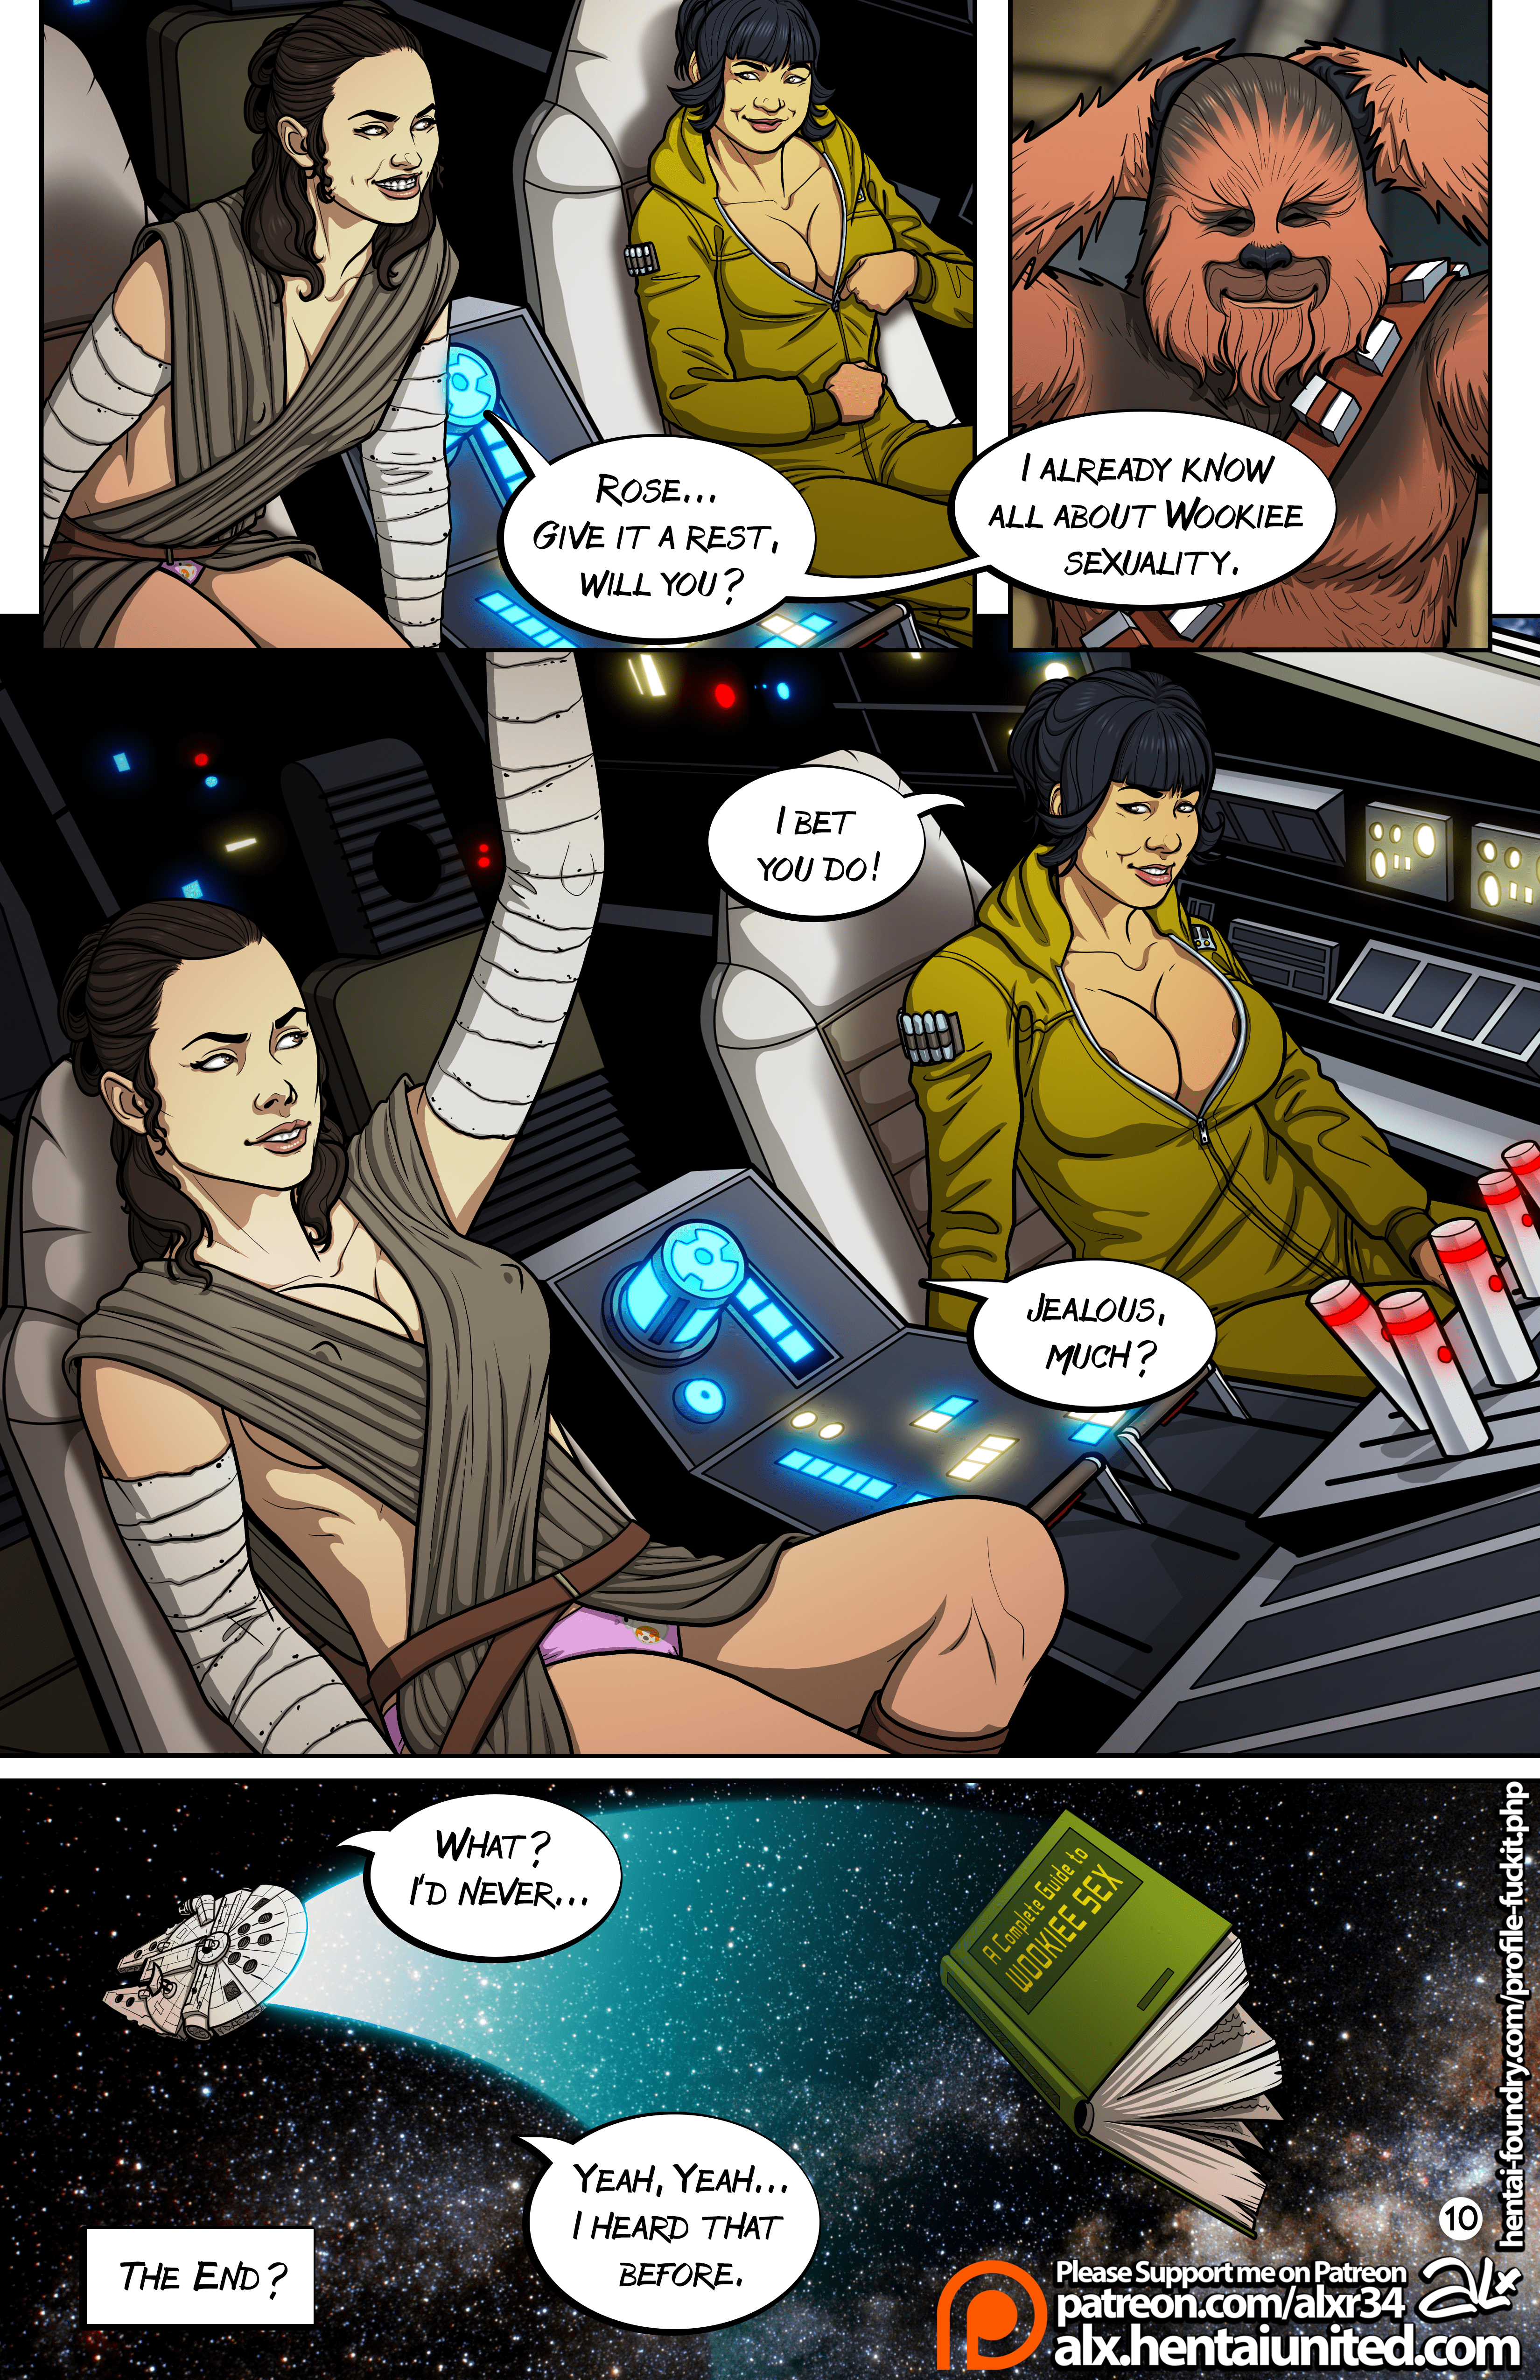 Star Wars A Complete Guide to Wookie Sex Parody Sex Comics ...